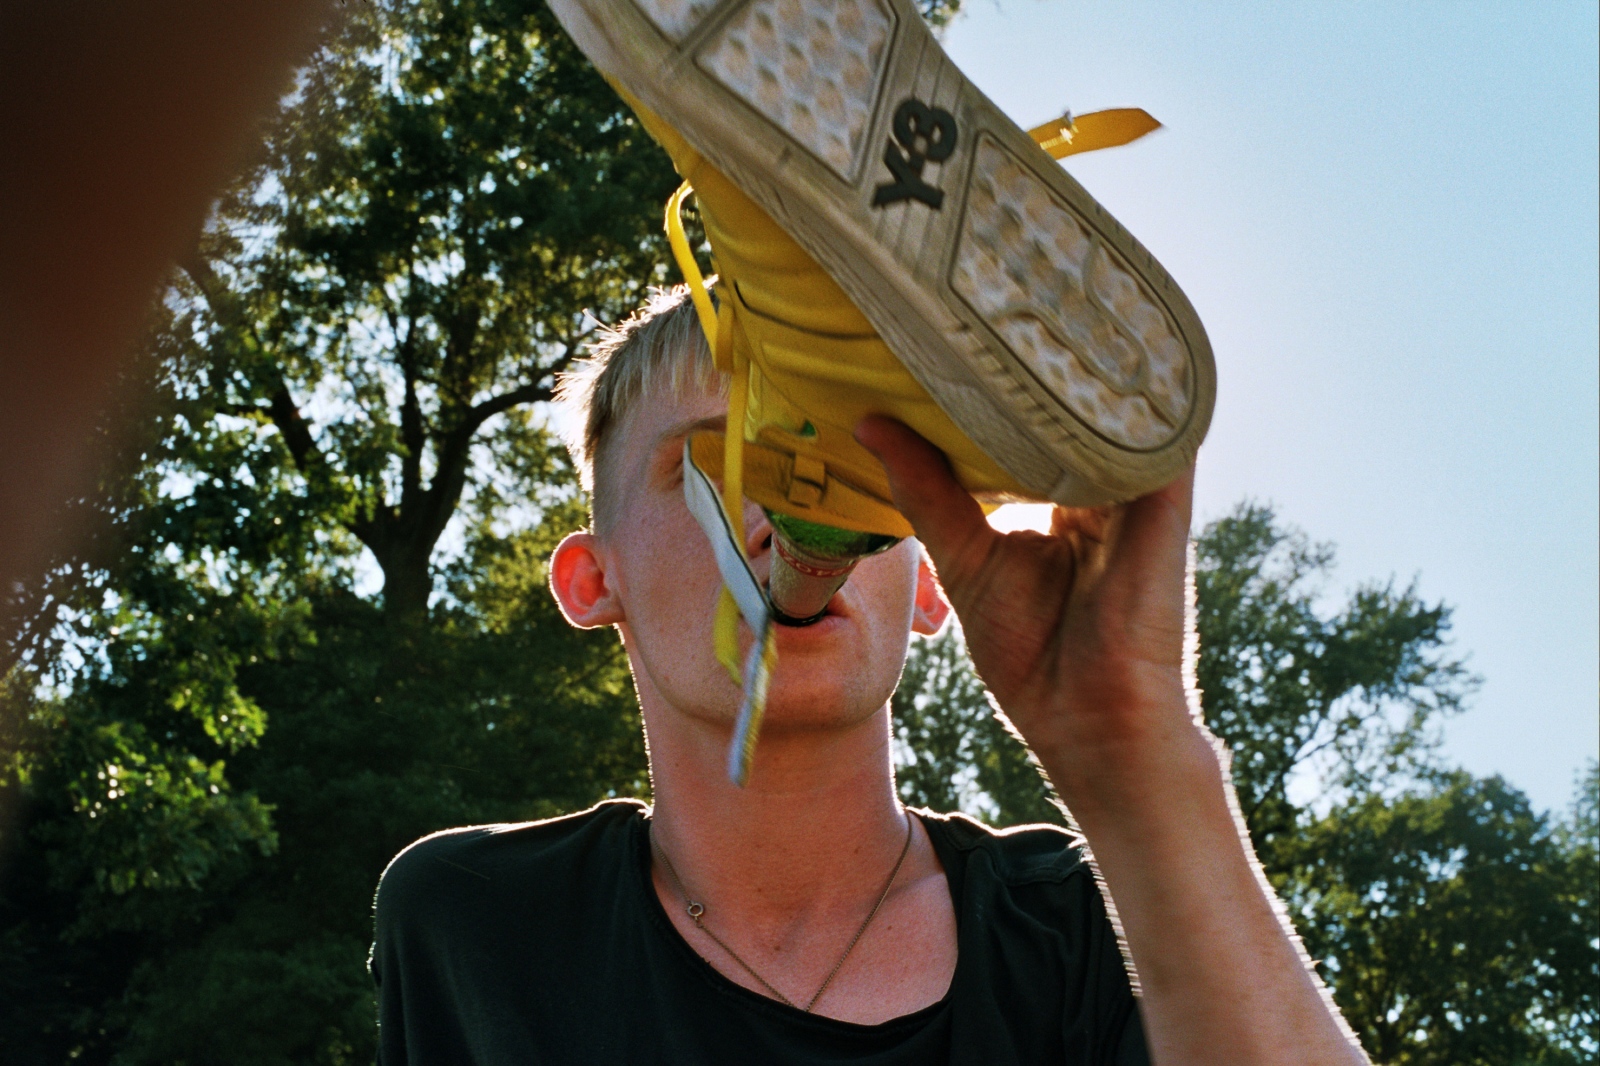 Dan drinking out of a shoe, Brooklyn, NY